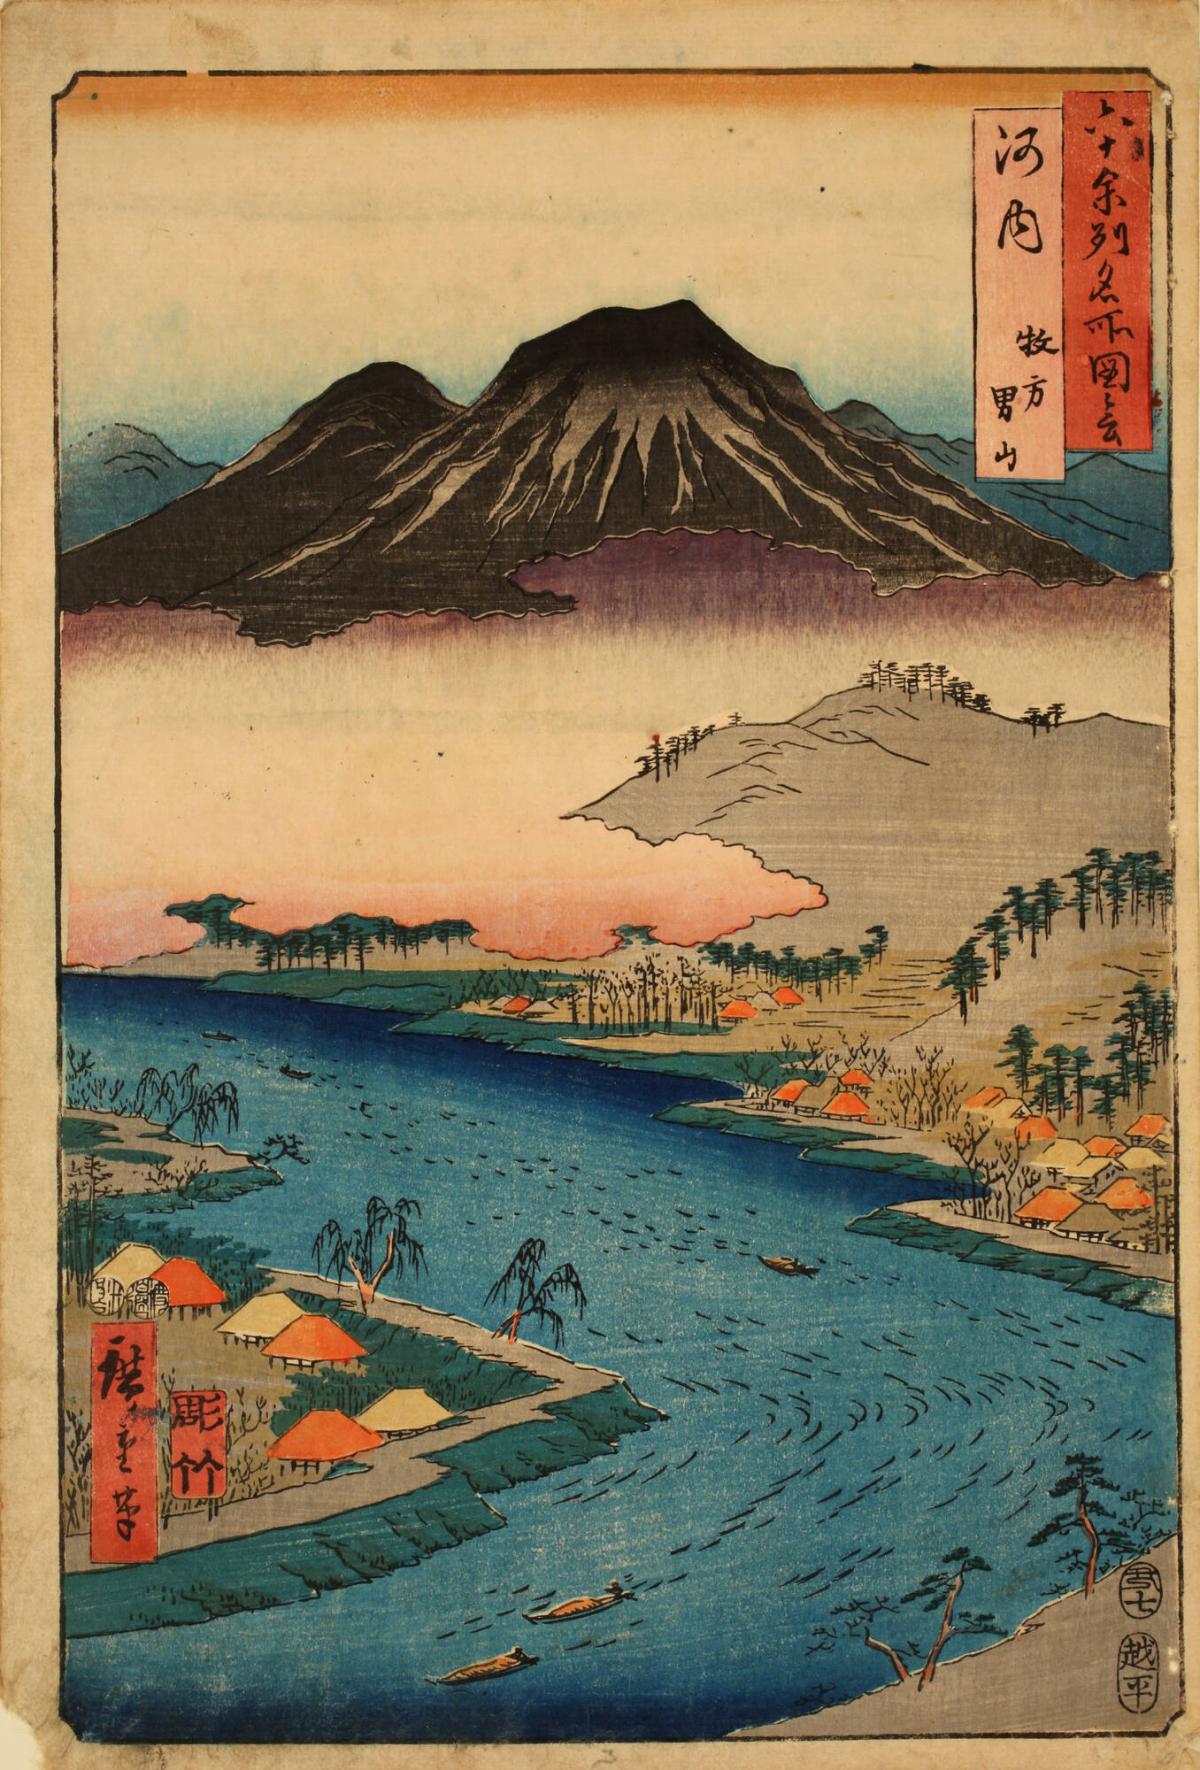 Otoko Mountain at Makigata in Kawachi Province, from the series Pictures of Famous Places in the Sixty-odd Provinces